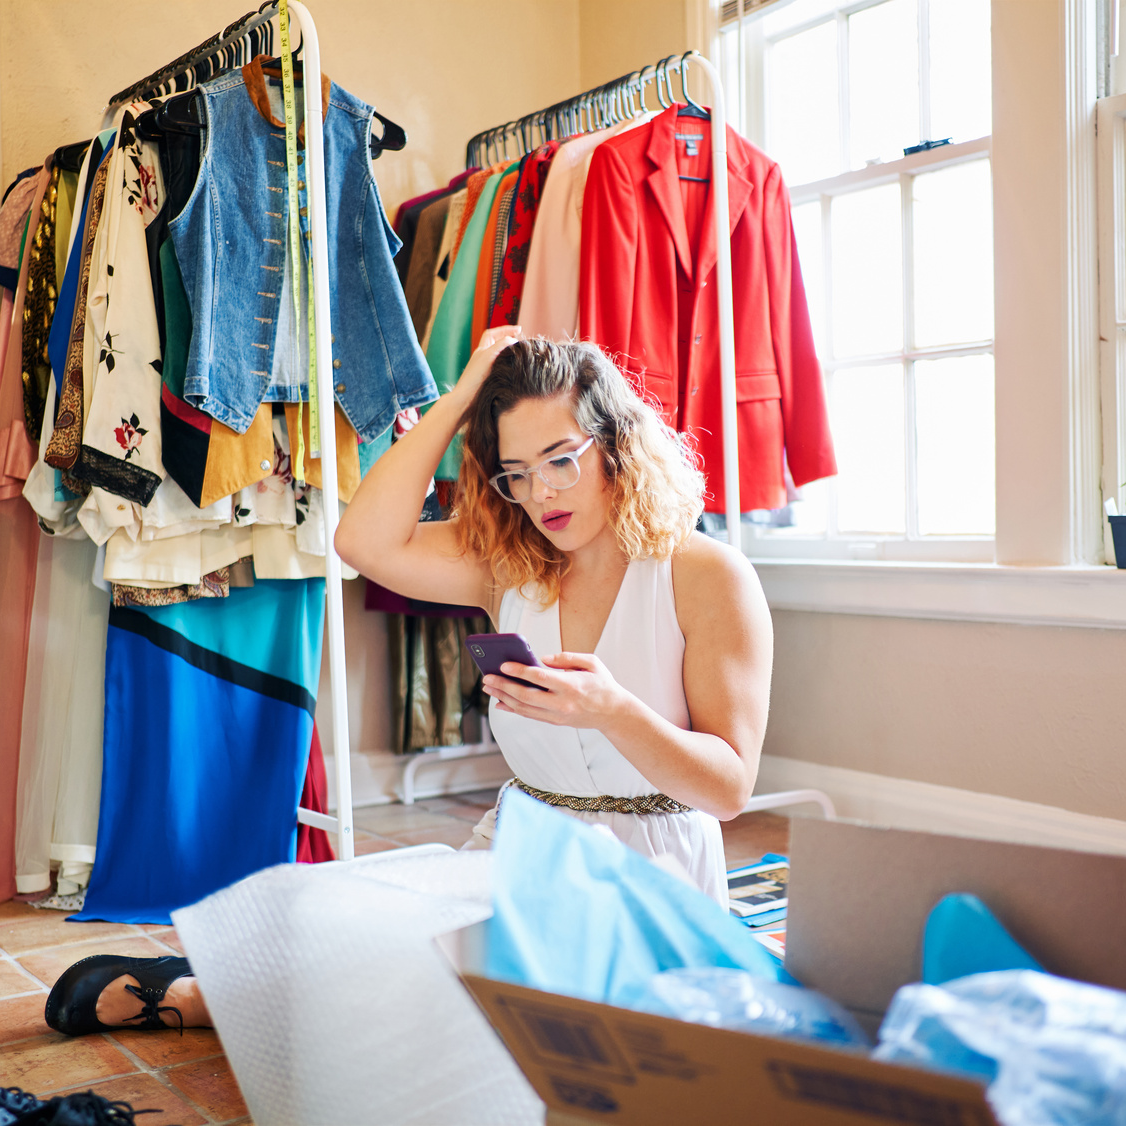 Seller checking their phone with clothes on a rack in the background